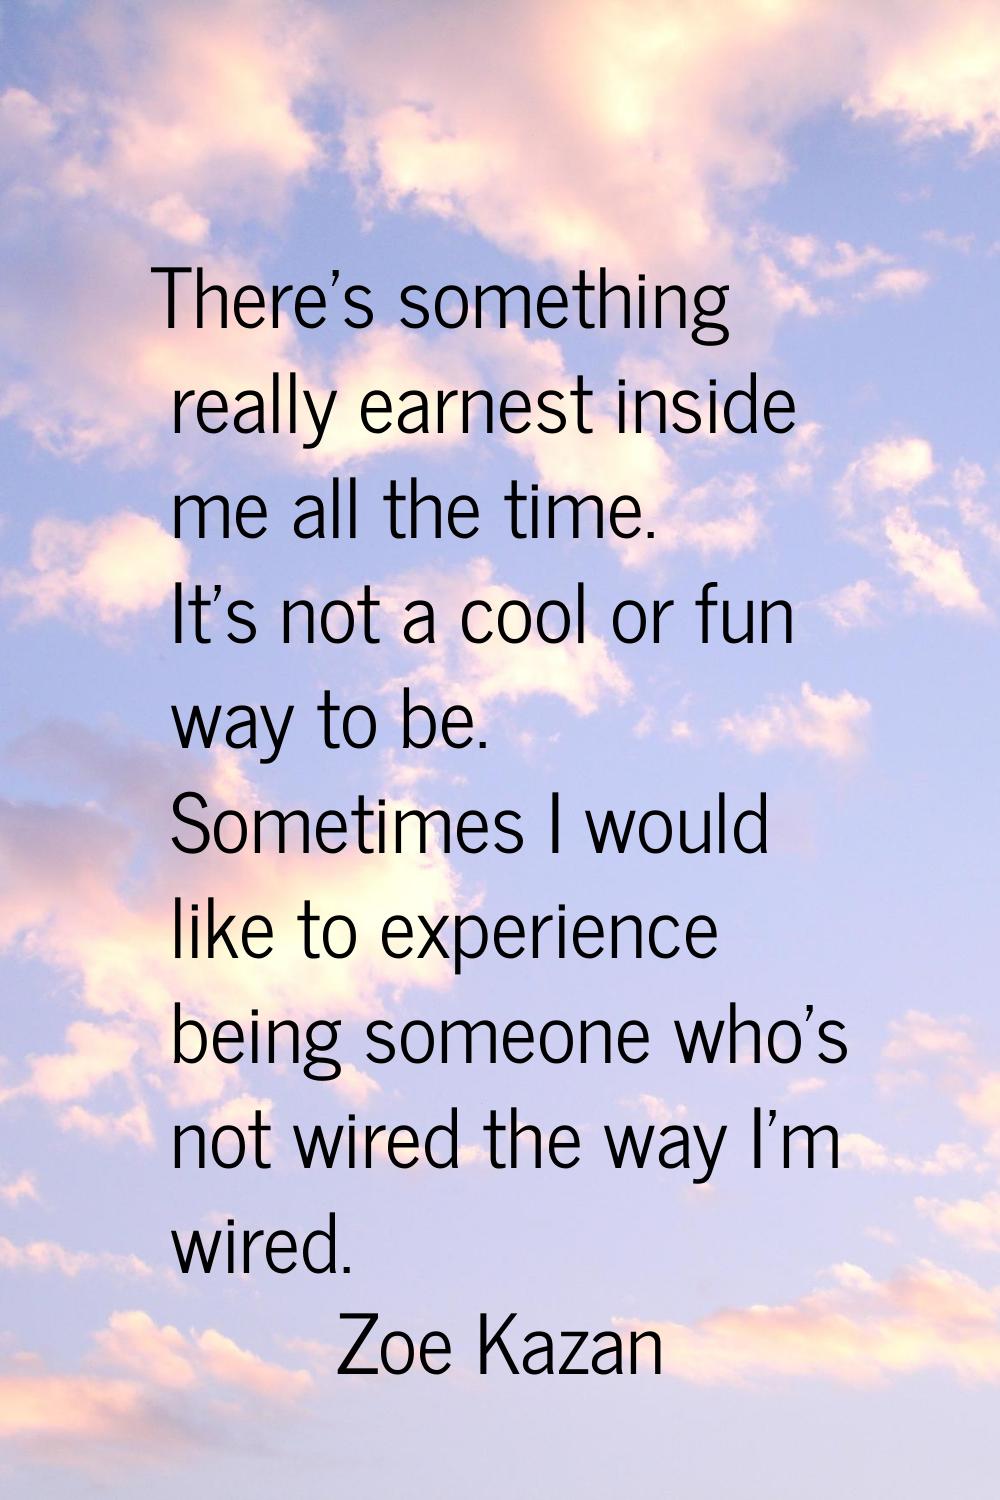 There's something really earnest inside me all the time. It's not a cool or fun way to be. Sometime